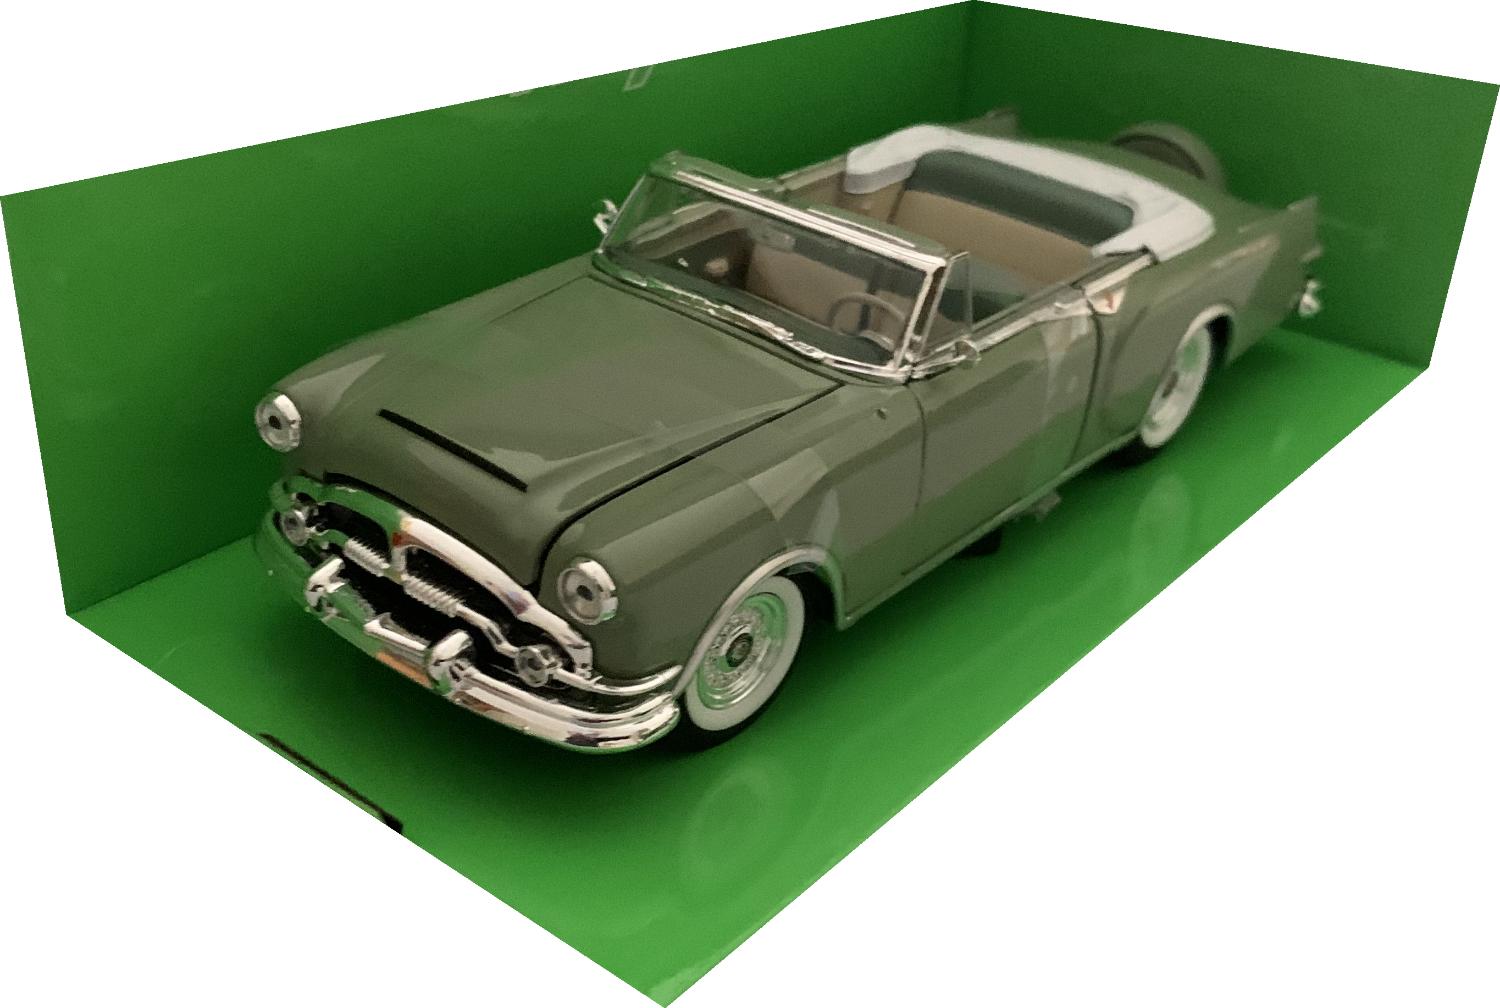 Packard Caribbean Cabriolet  1953 in light green 1:28 scale model from Welly